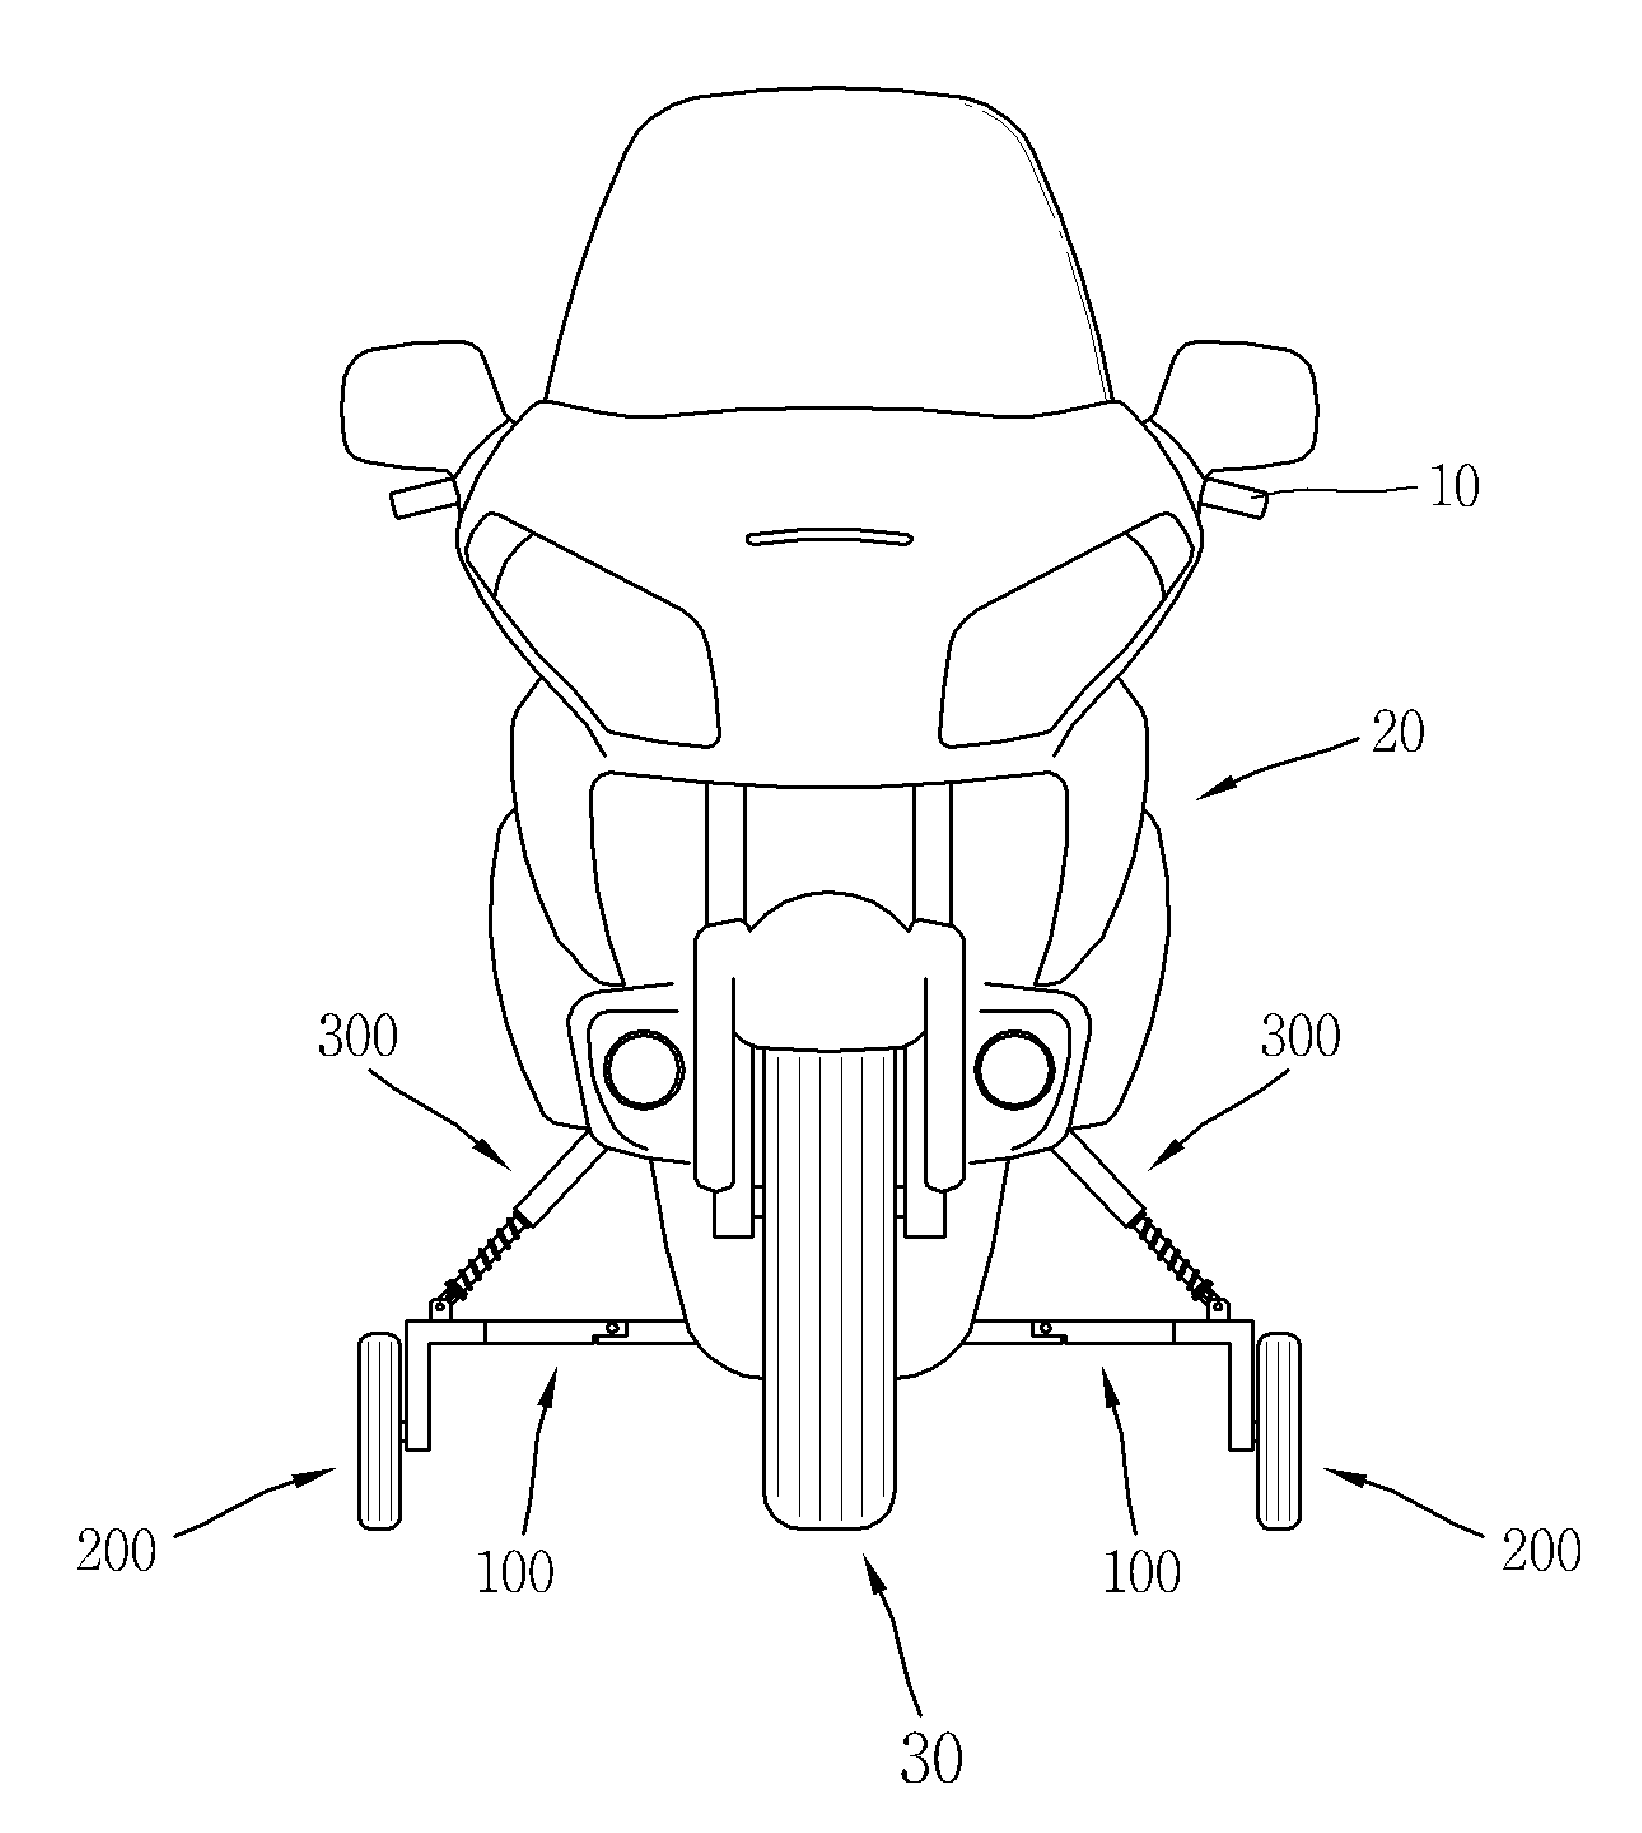 Safety apparatus for motorcycle